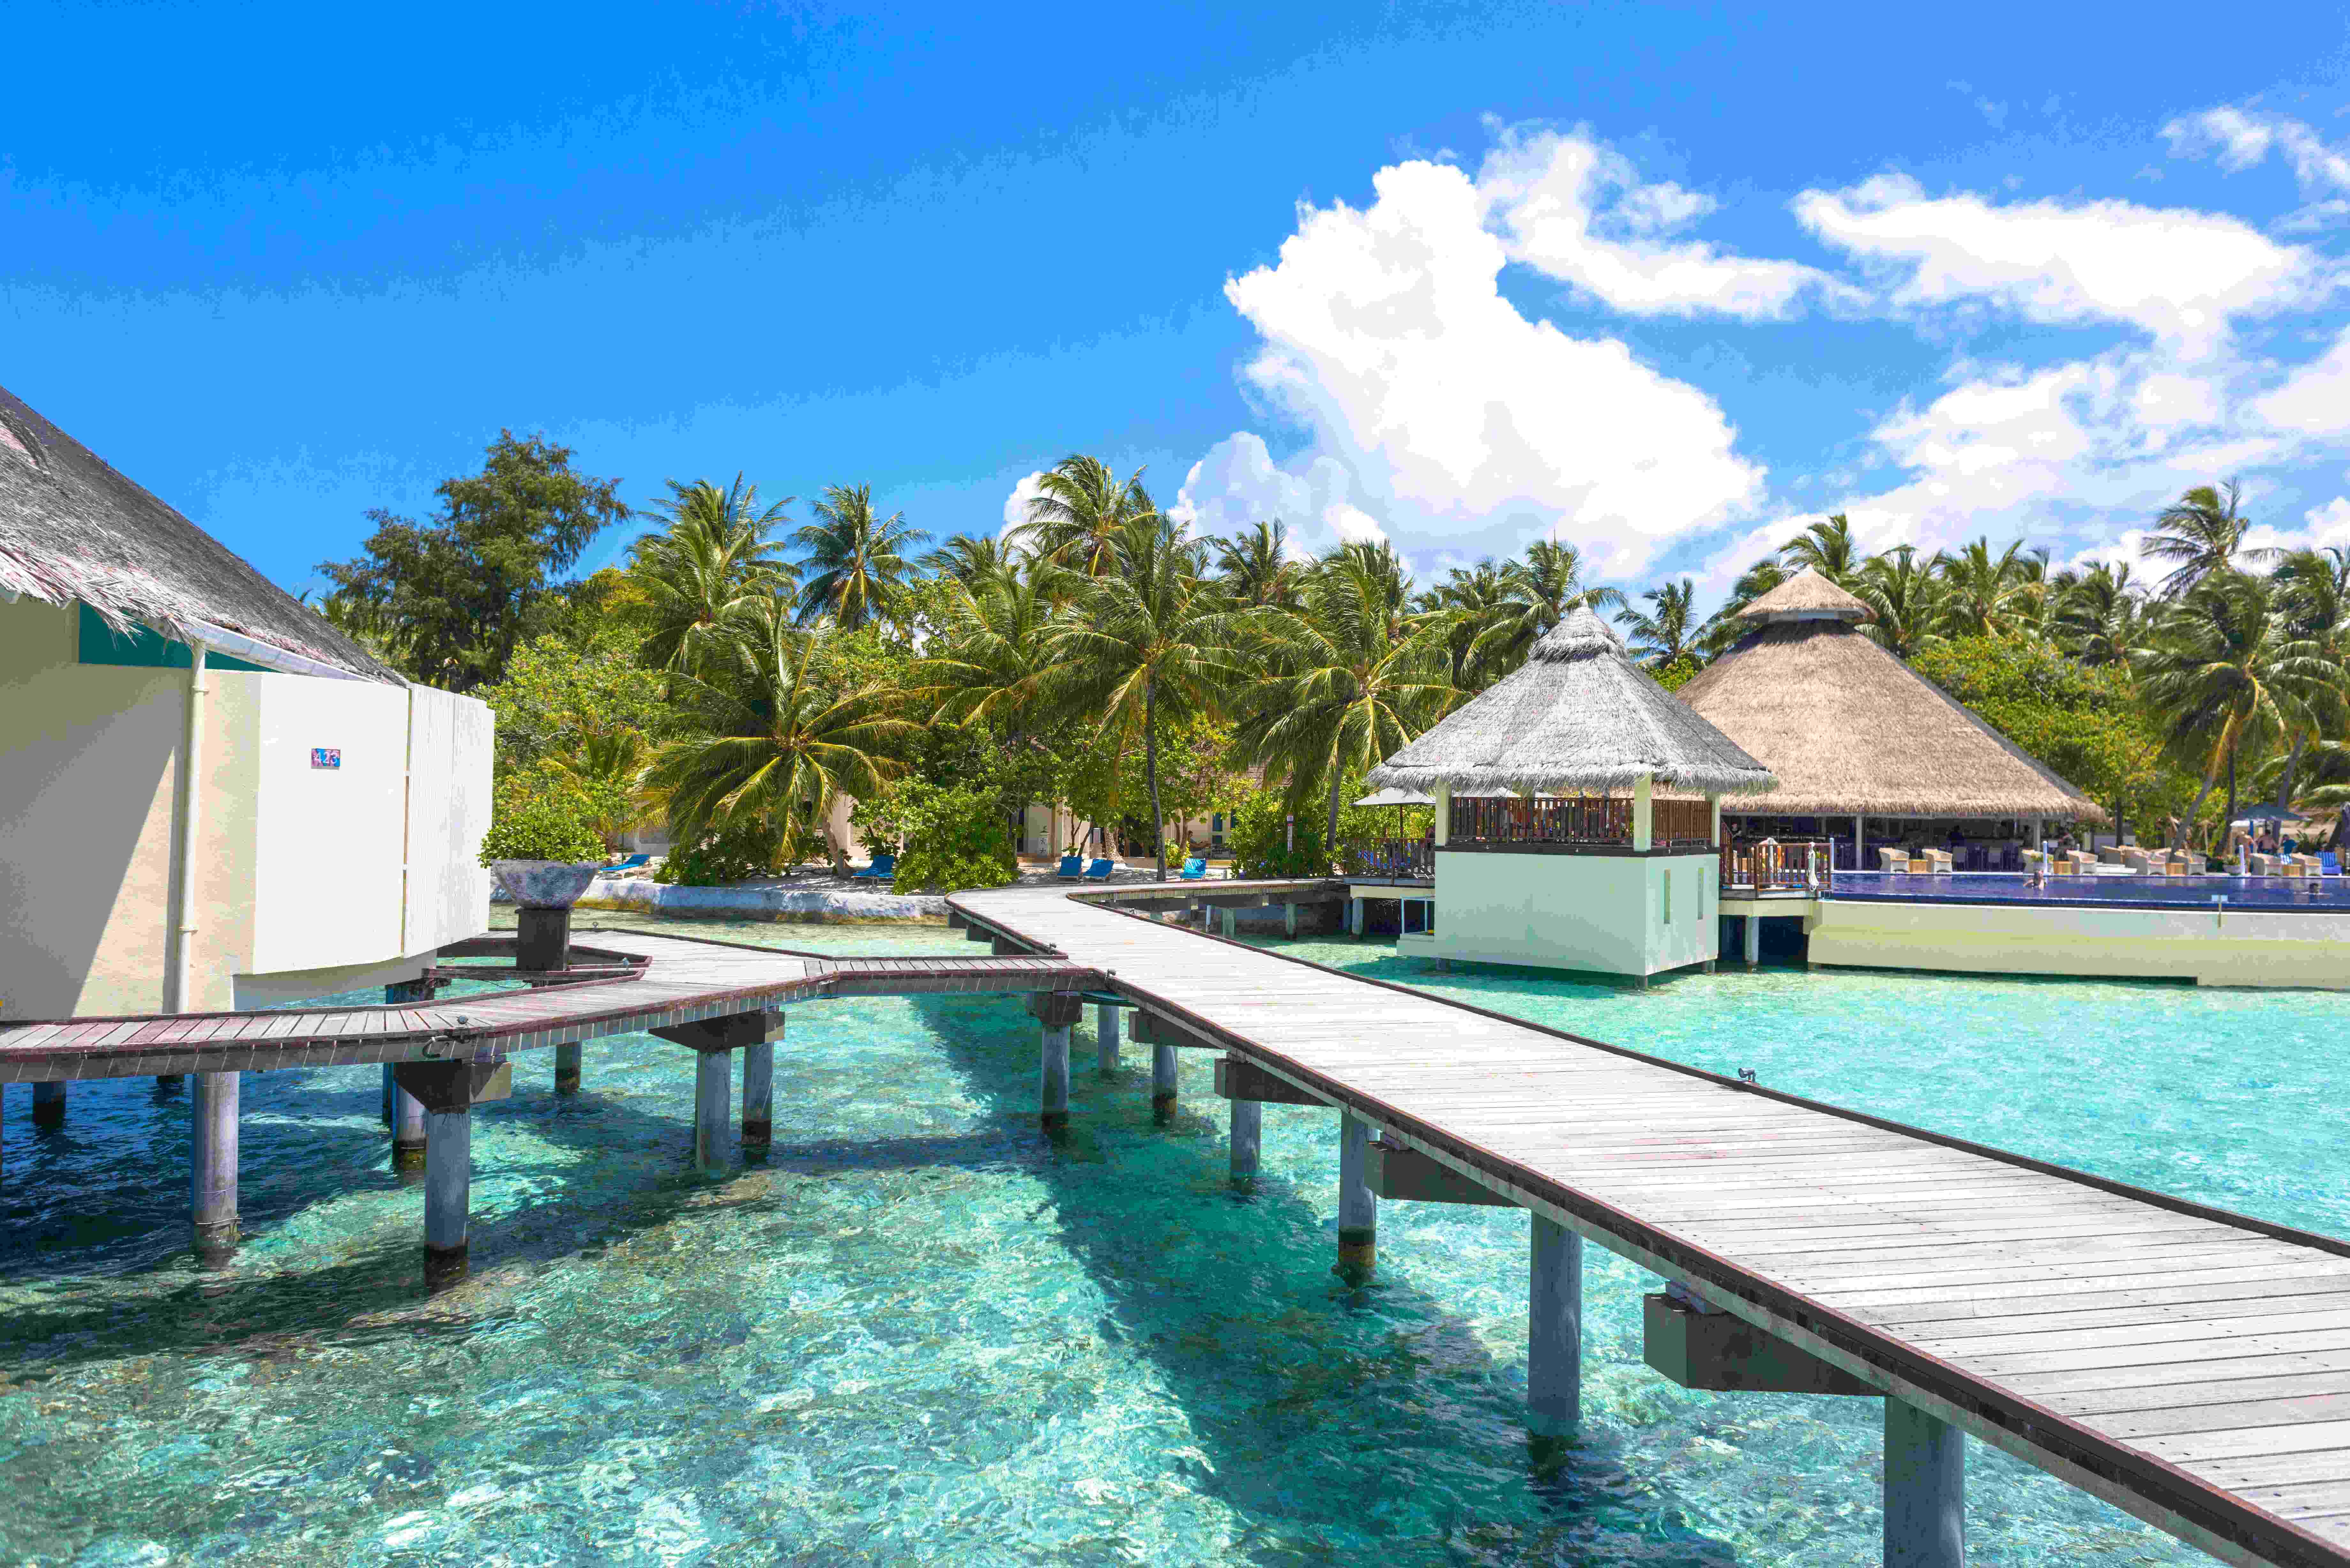 Luxurious Maldives Getaway: 4-Day Island Escape with Water Villa Bliss